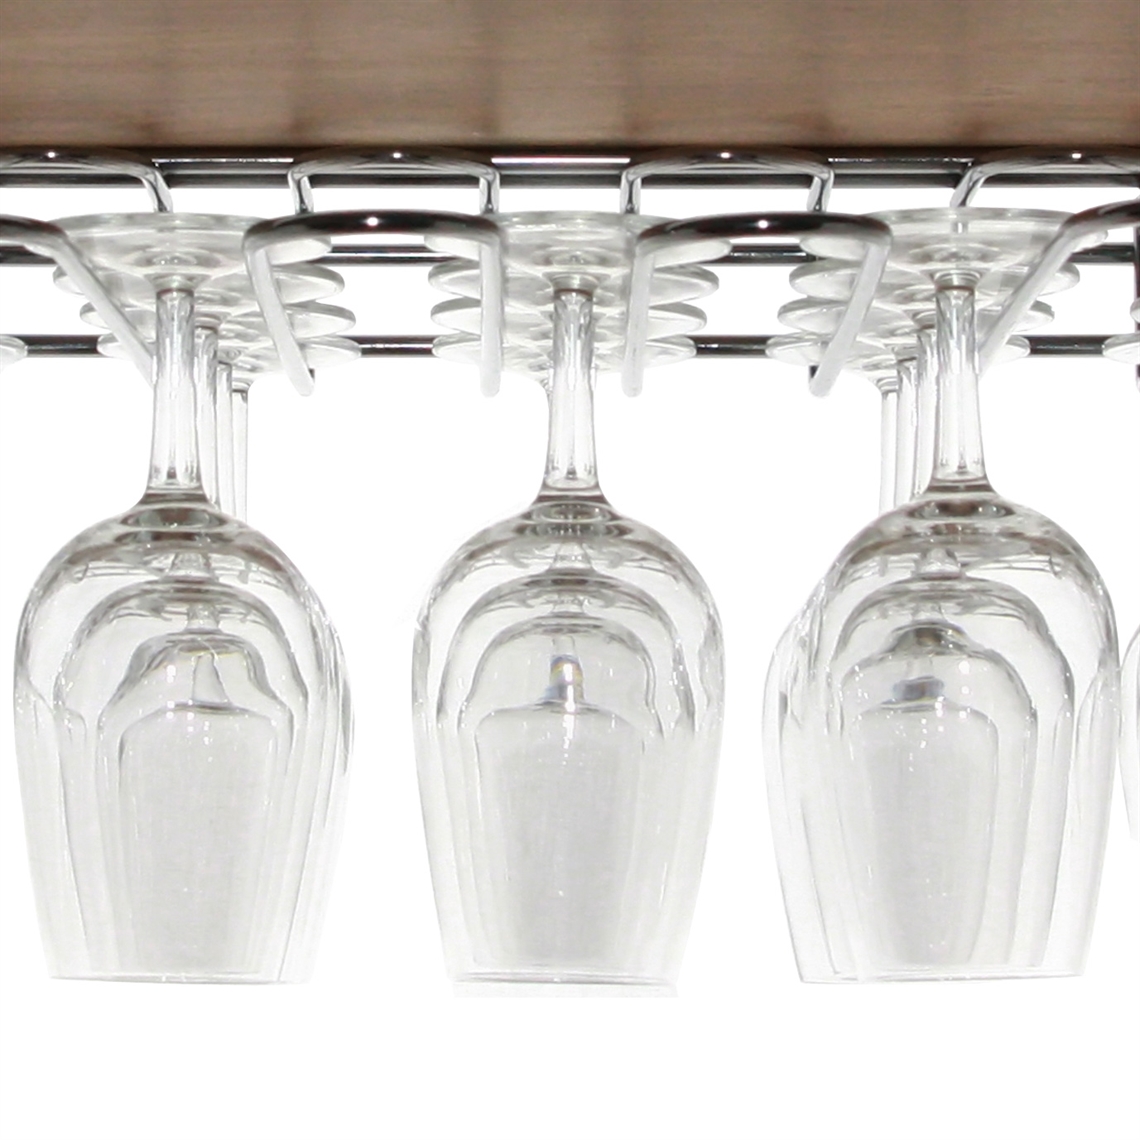 View more what you need to set up a wine bar / restaurant guide from our Wine Glass Hanging Racks range